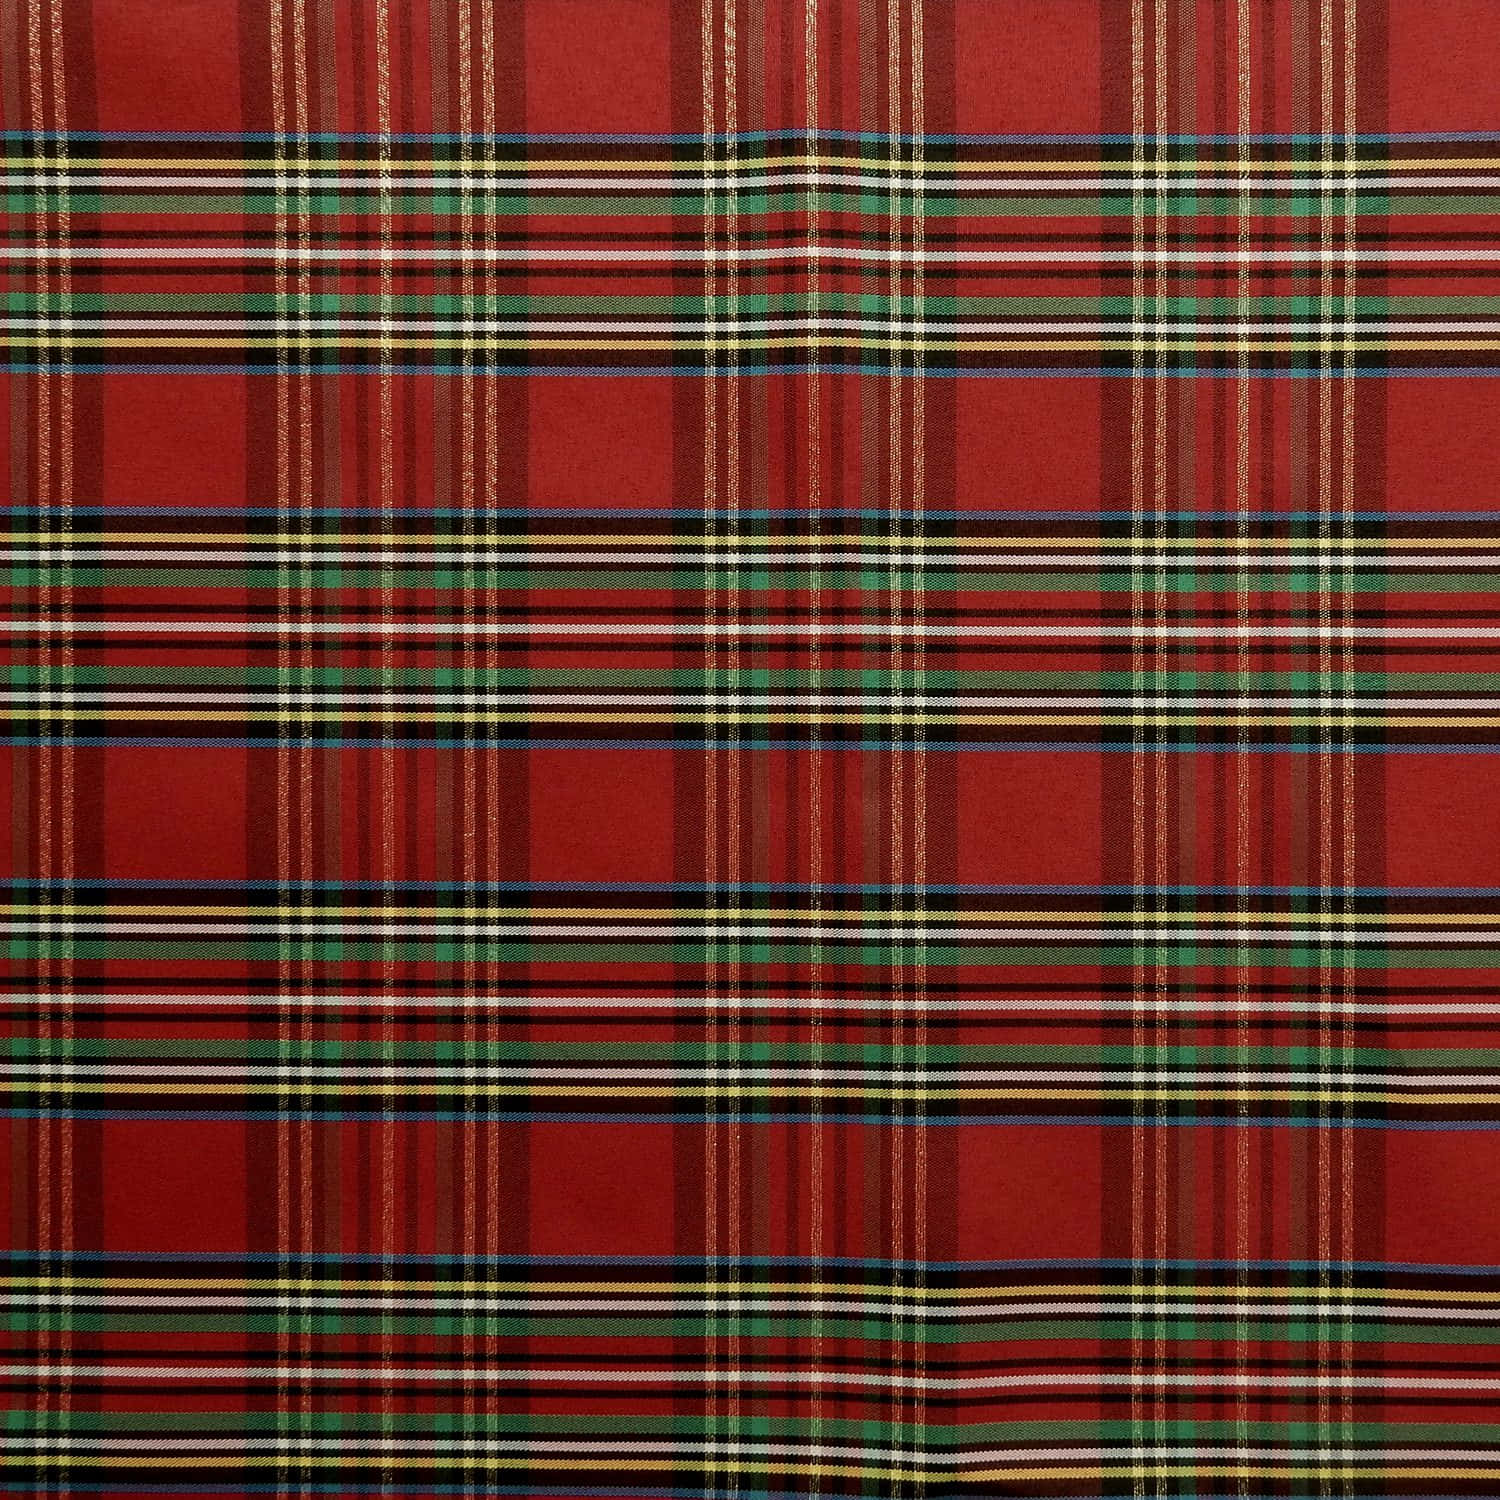 Bring the Joy of the Holidays With this Christmas Plaid Background